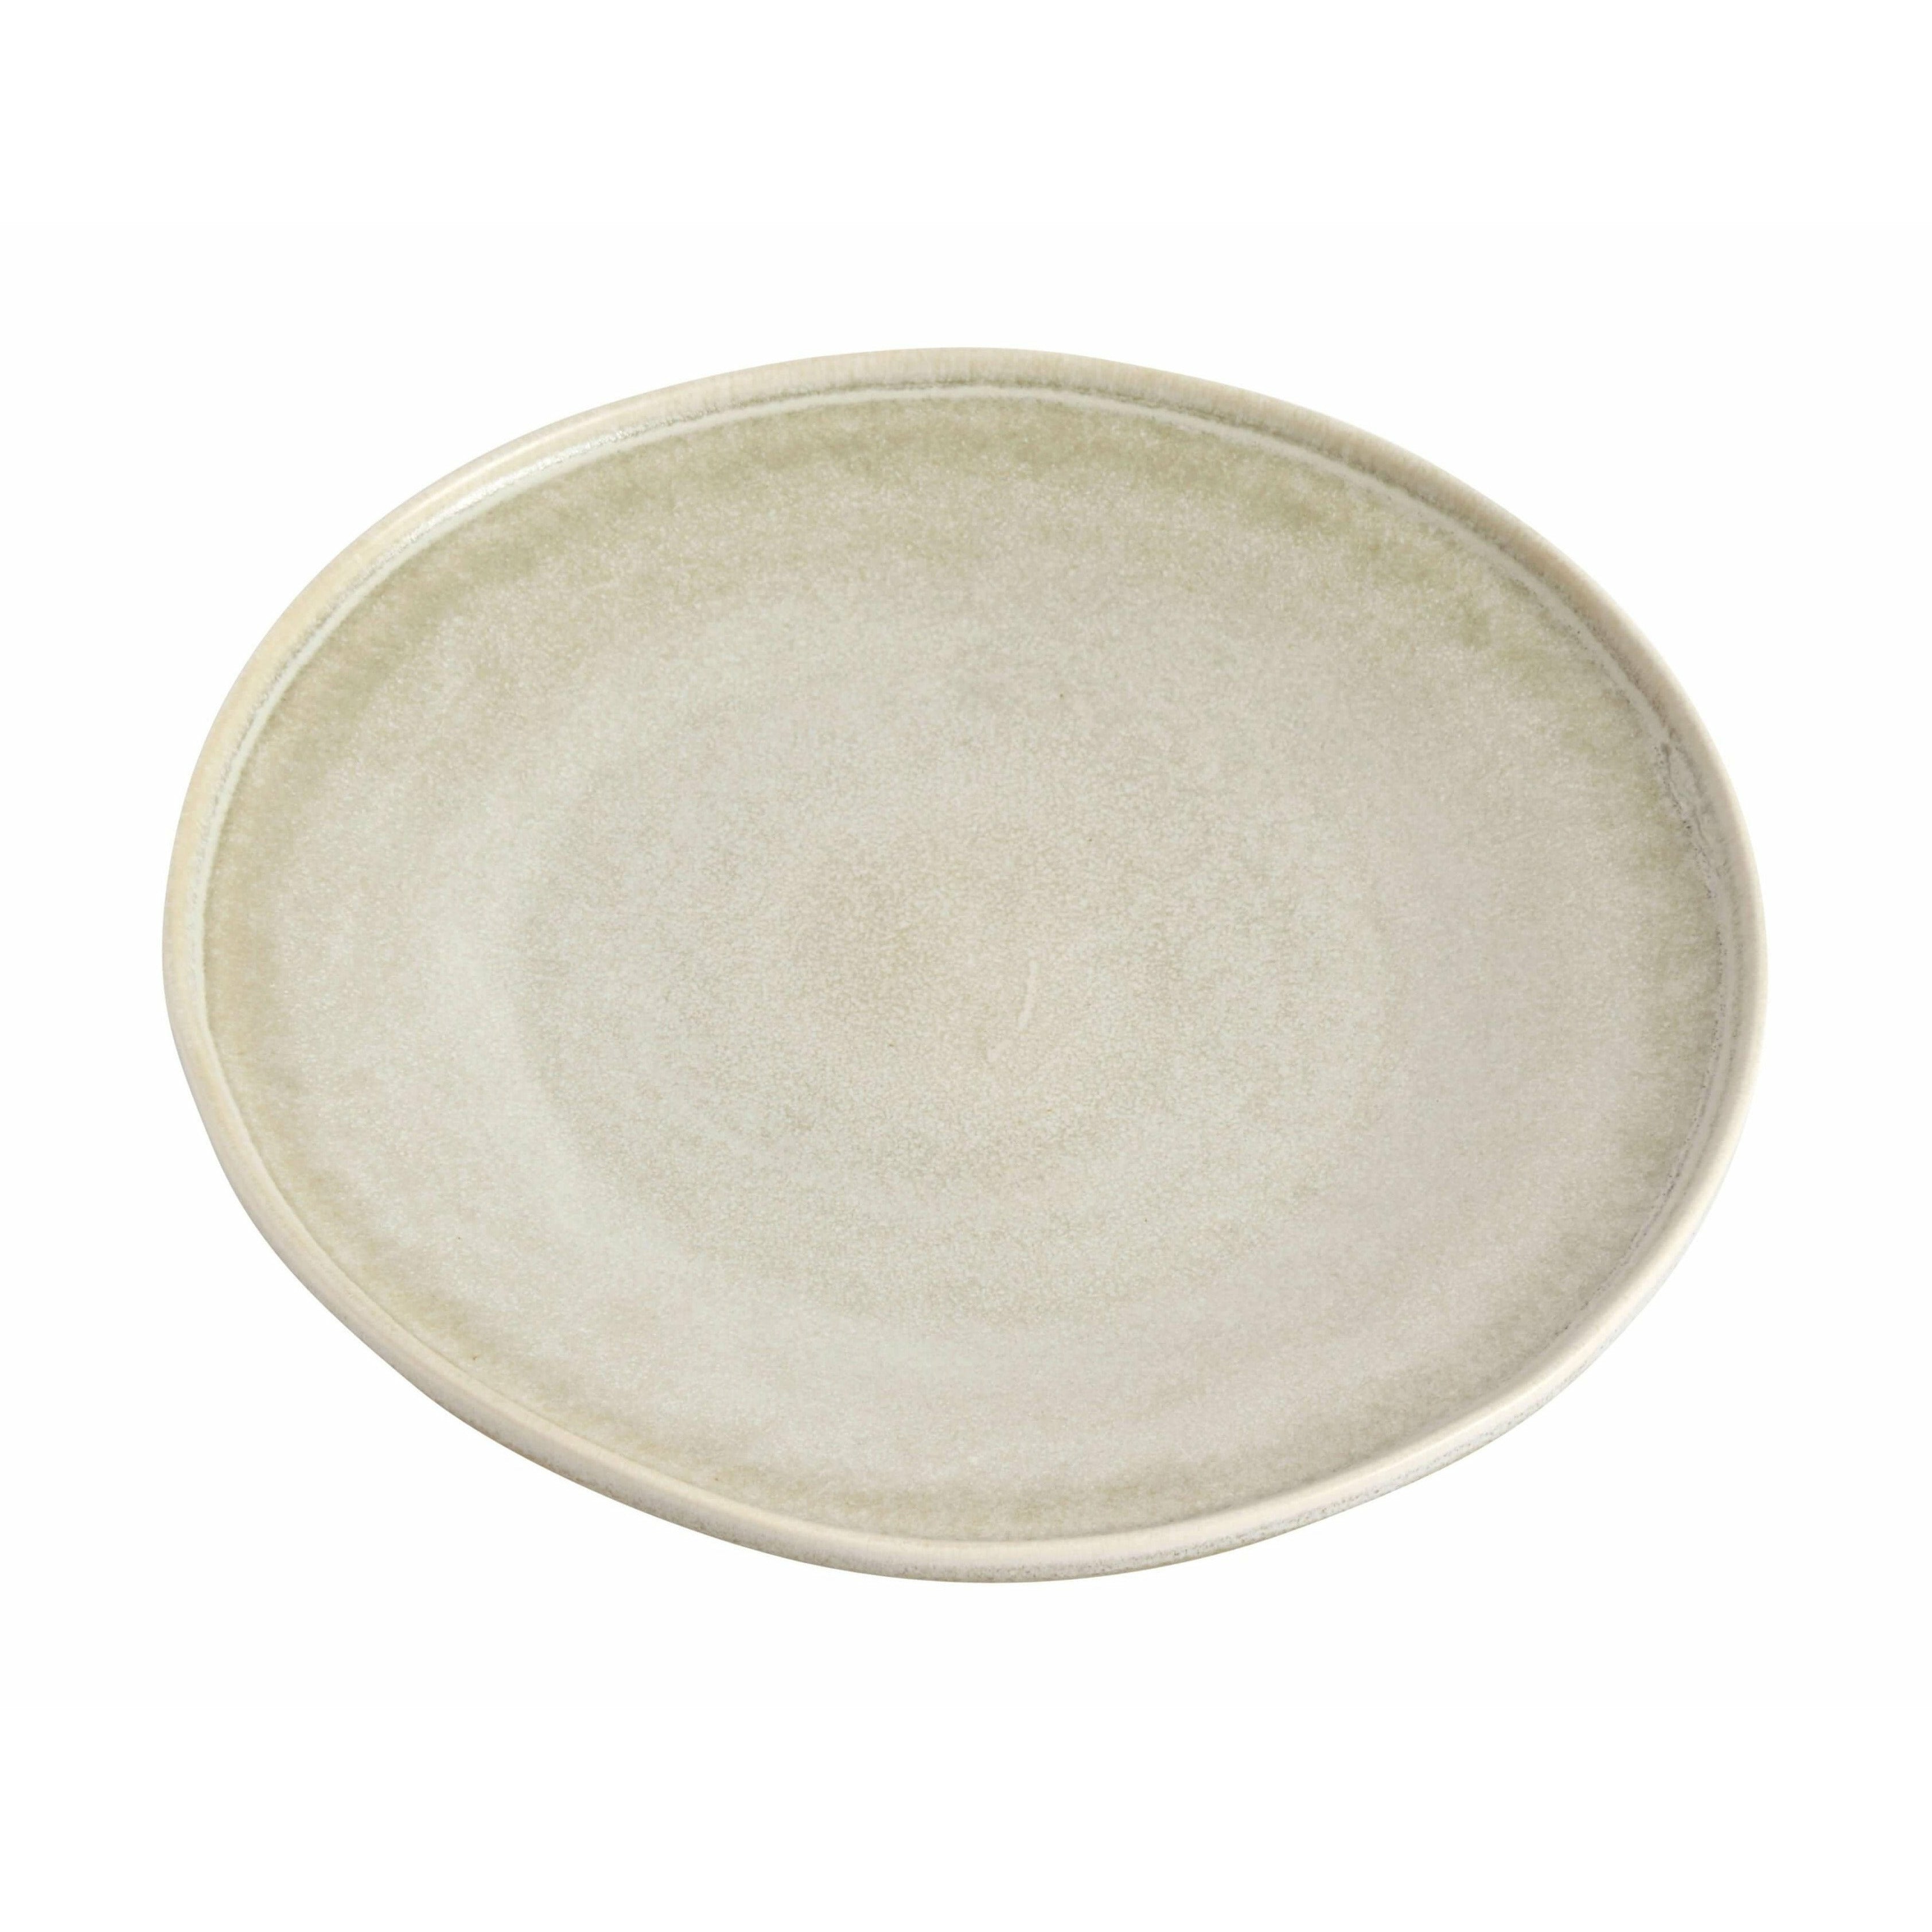 Muubs Ceto Cake Plate Sand, 22cm